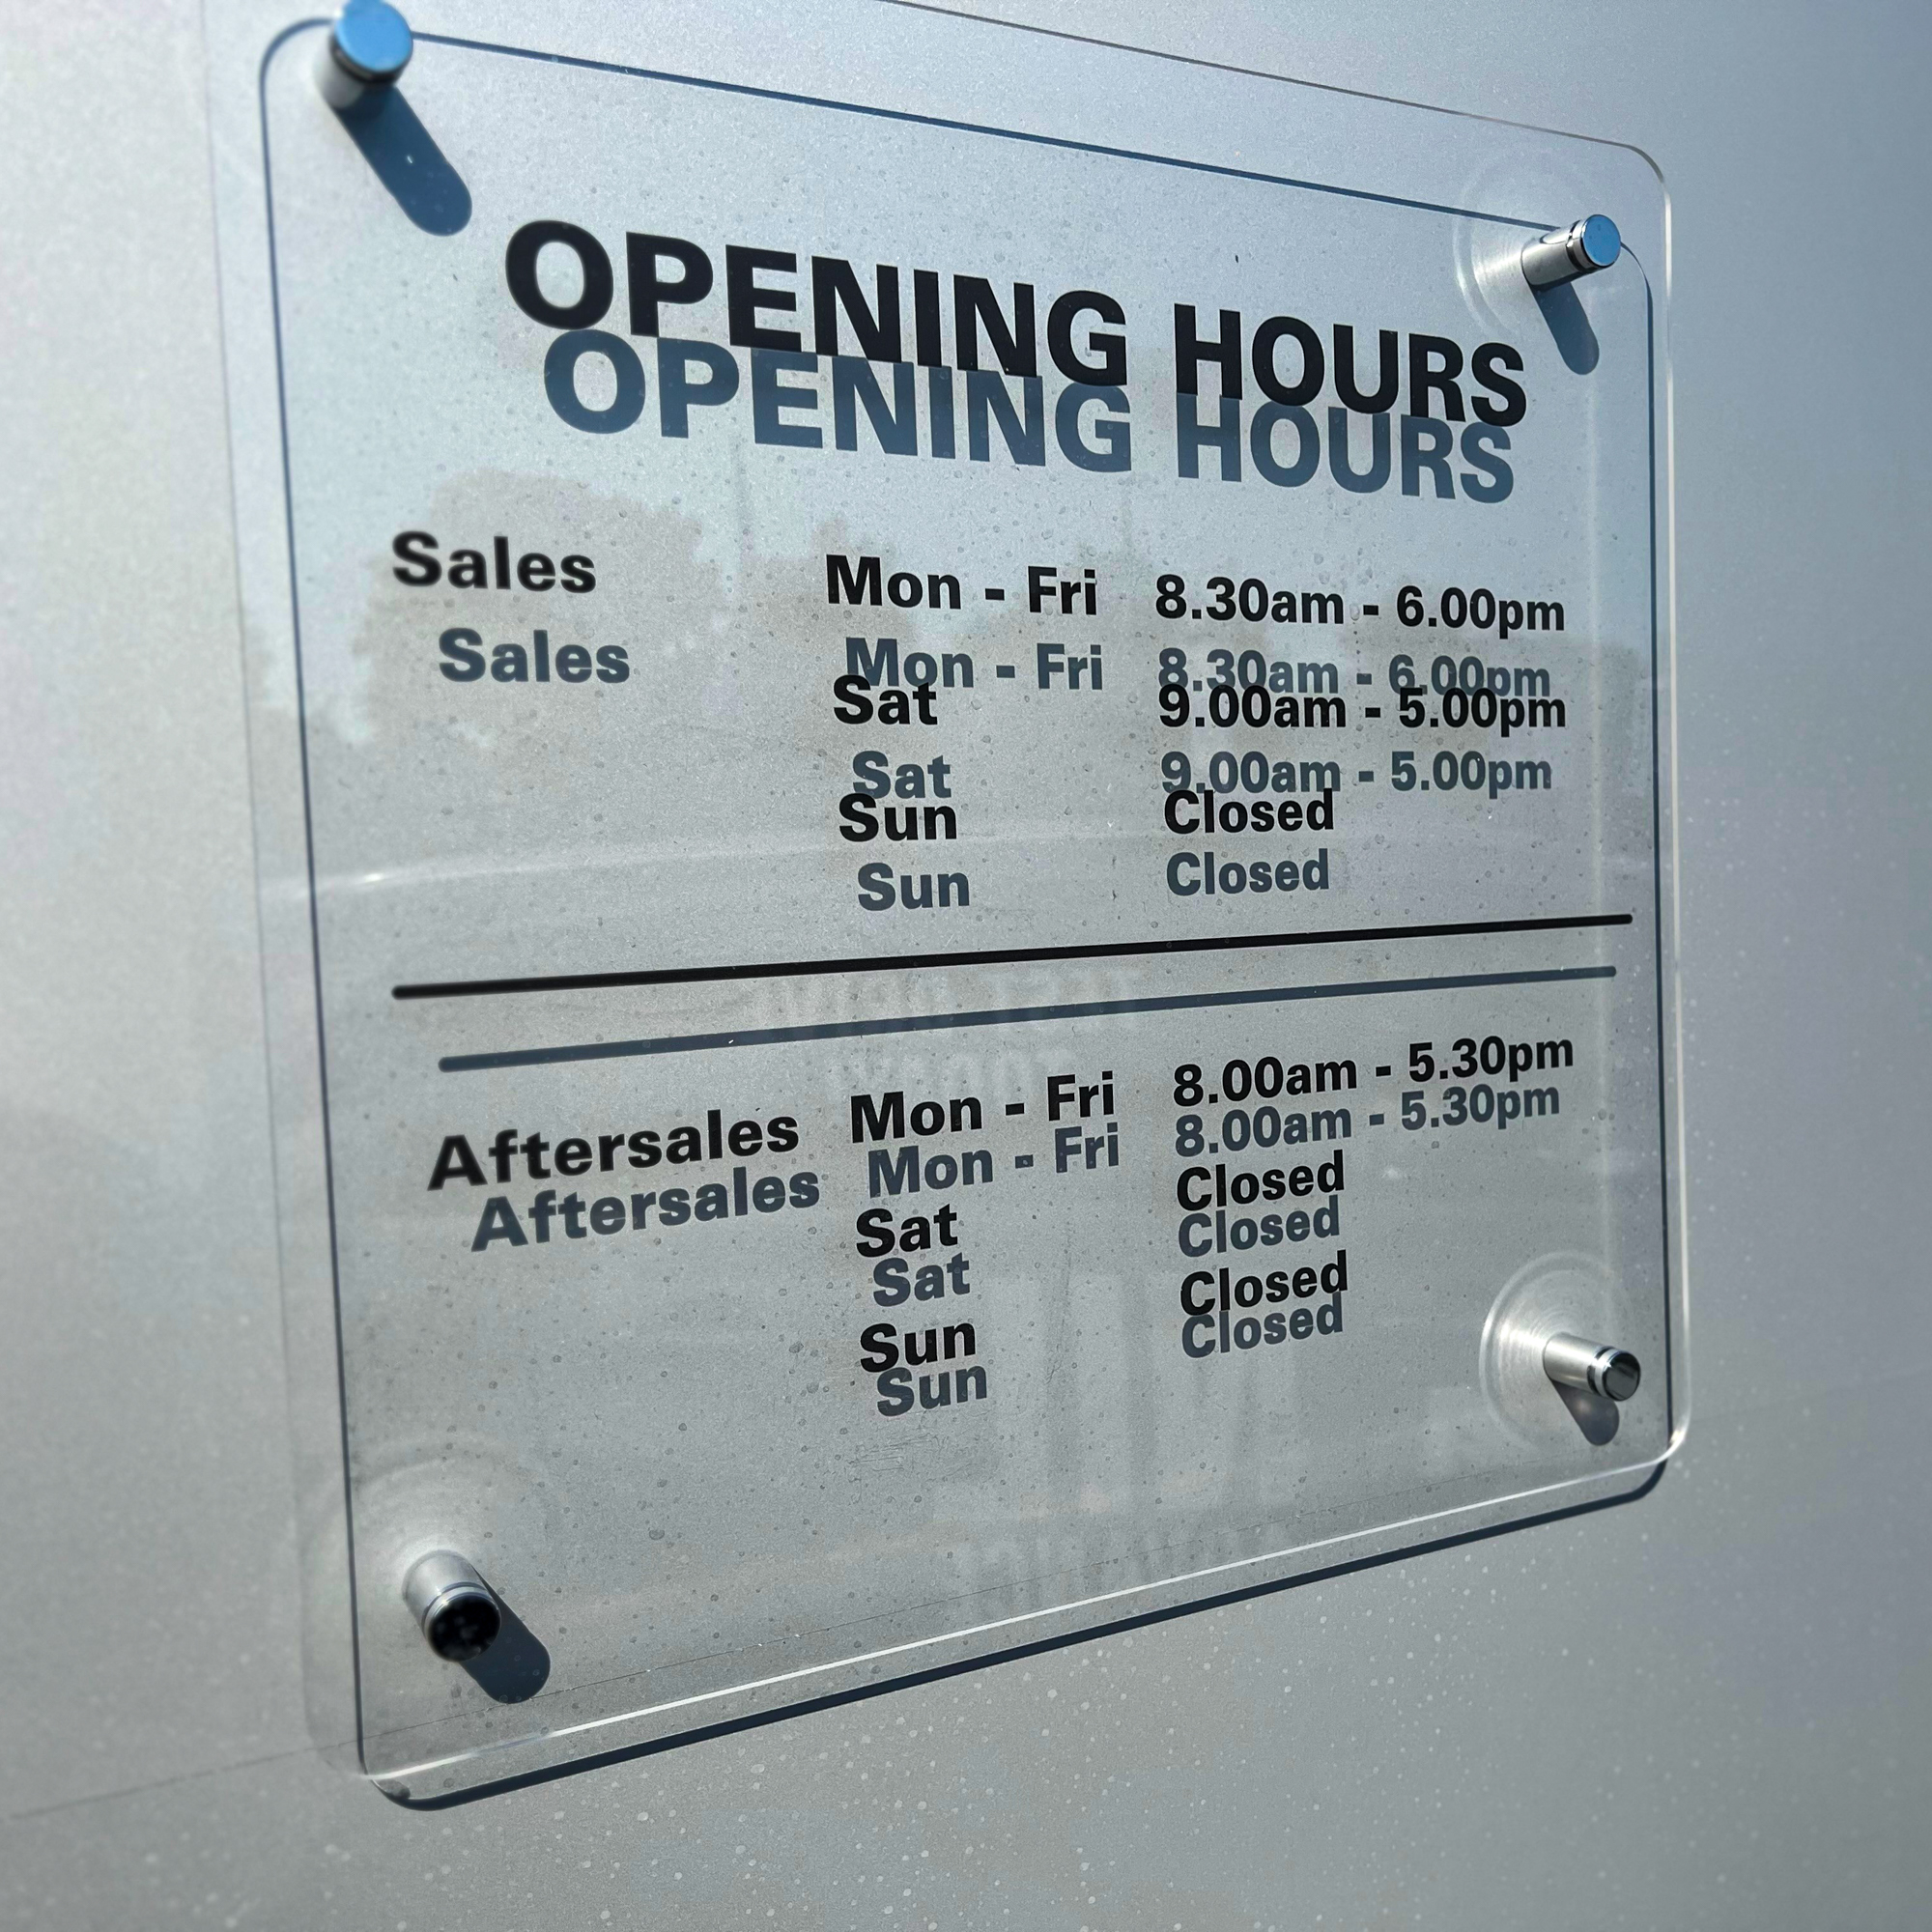 EMC Uckfield Suzuki's Opening Hours for Sales and Service